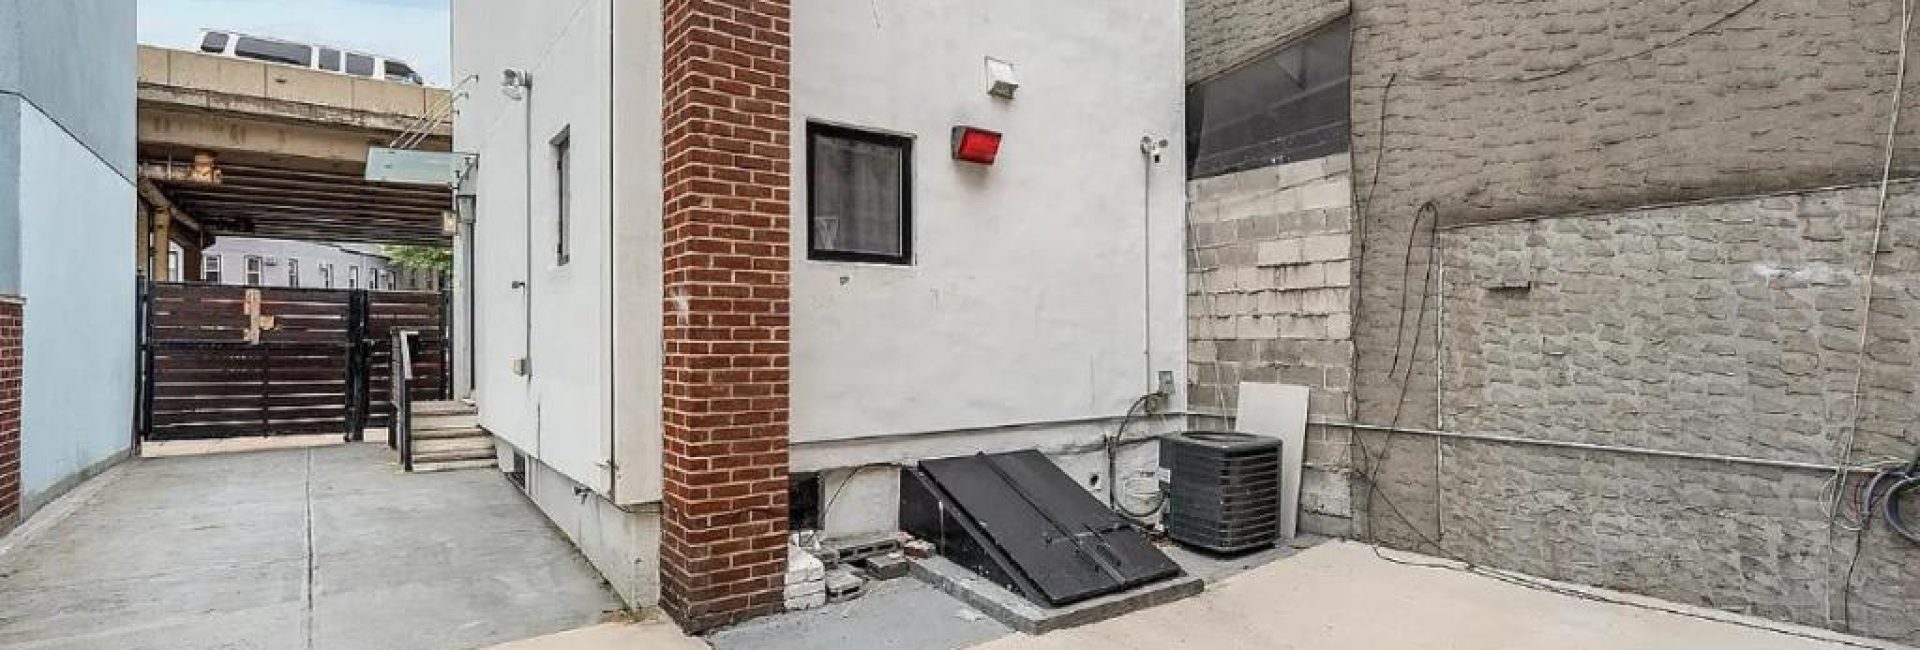 PRIVATE HOT TUB-Private Gated Sailor Moon House in Williamsburg w GYM